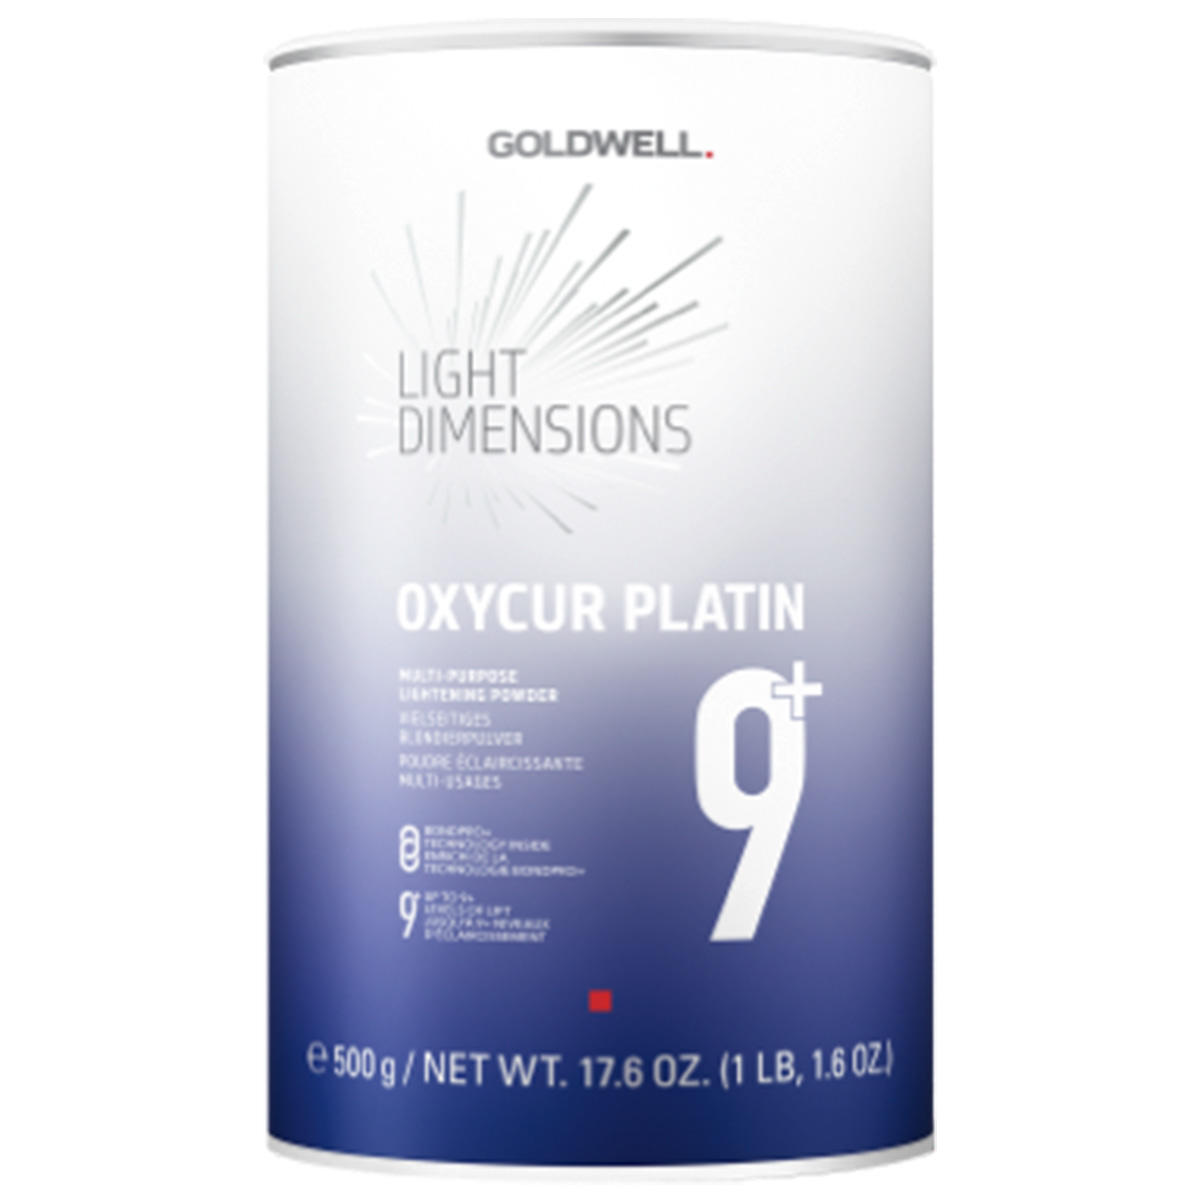 Goldwell Oxycur Platin oxycur platin dust-free, 500 g